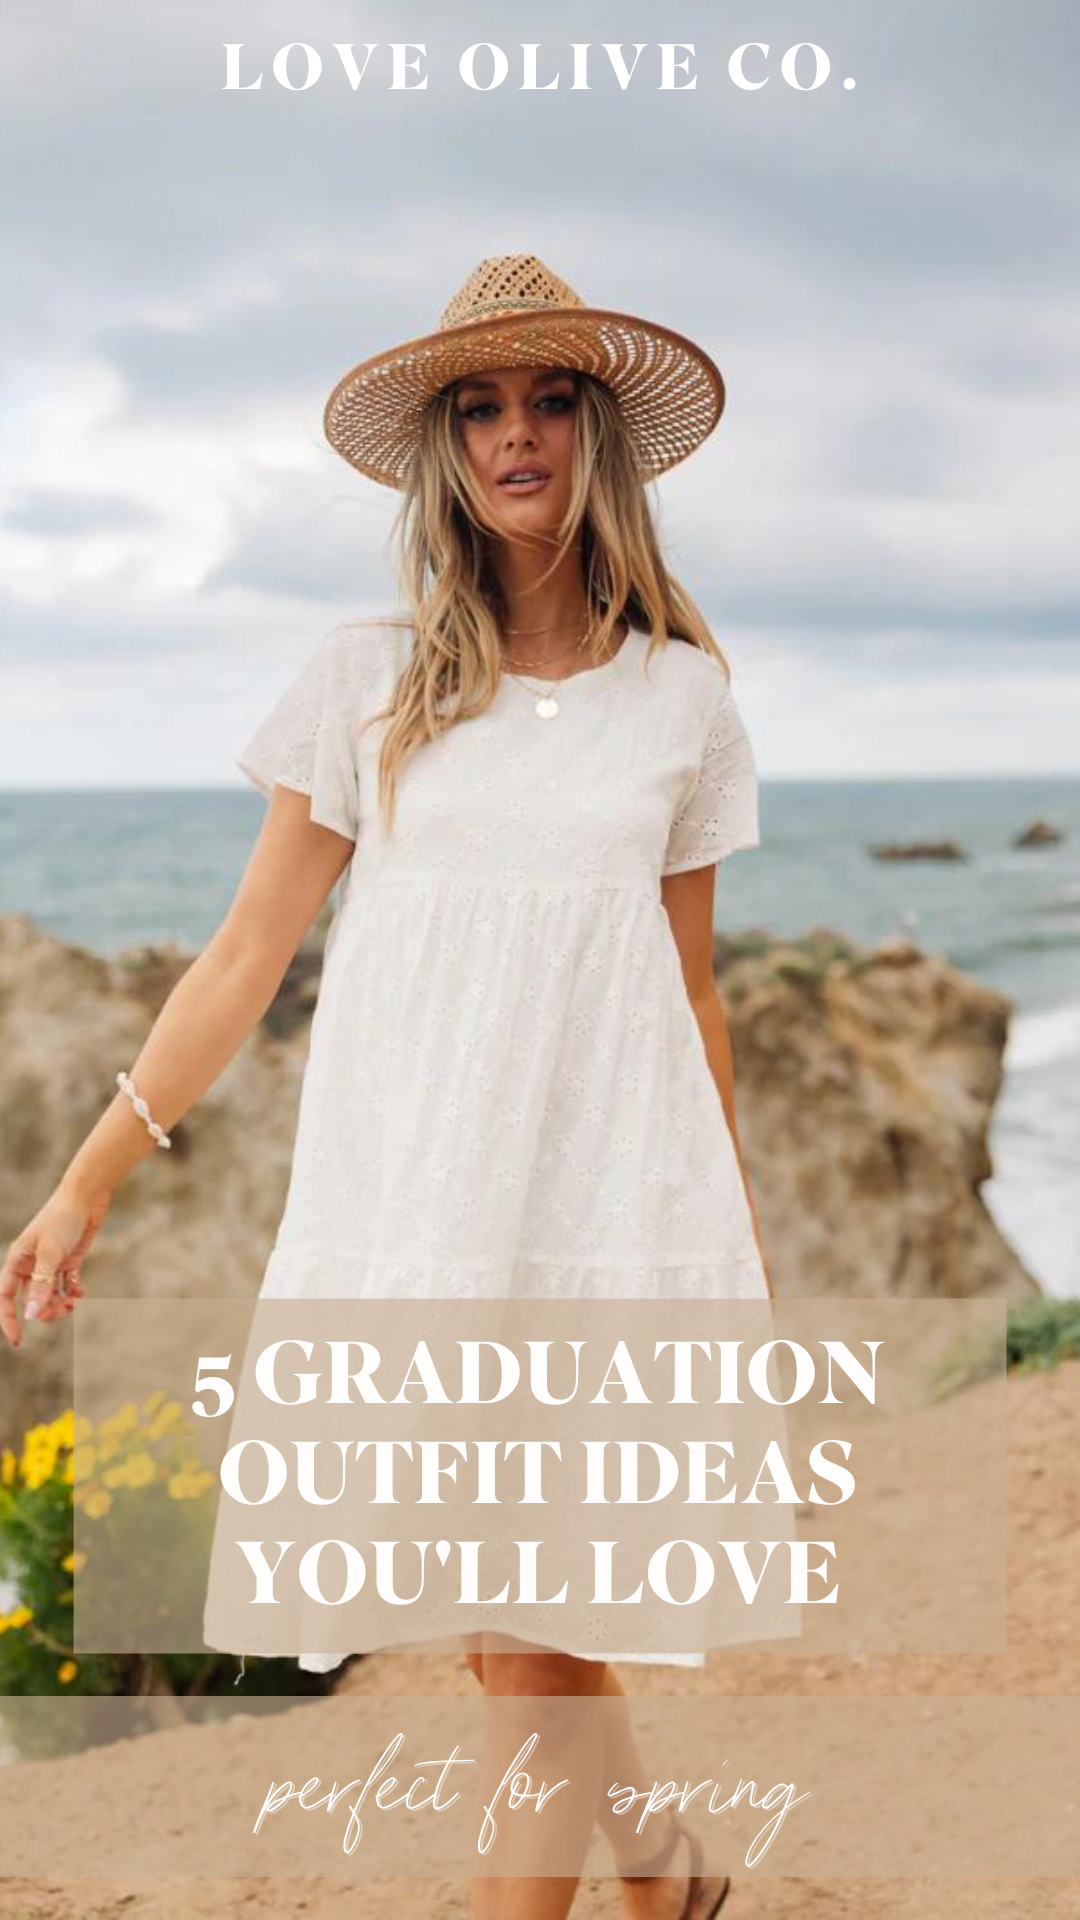 5 graduation outfit ideas you'll love. www.loveoliveco.com